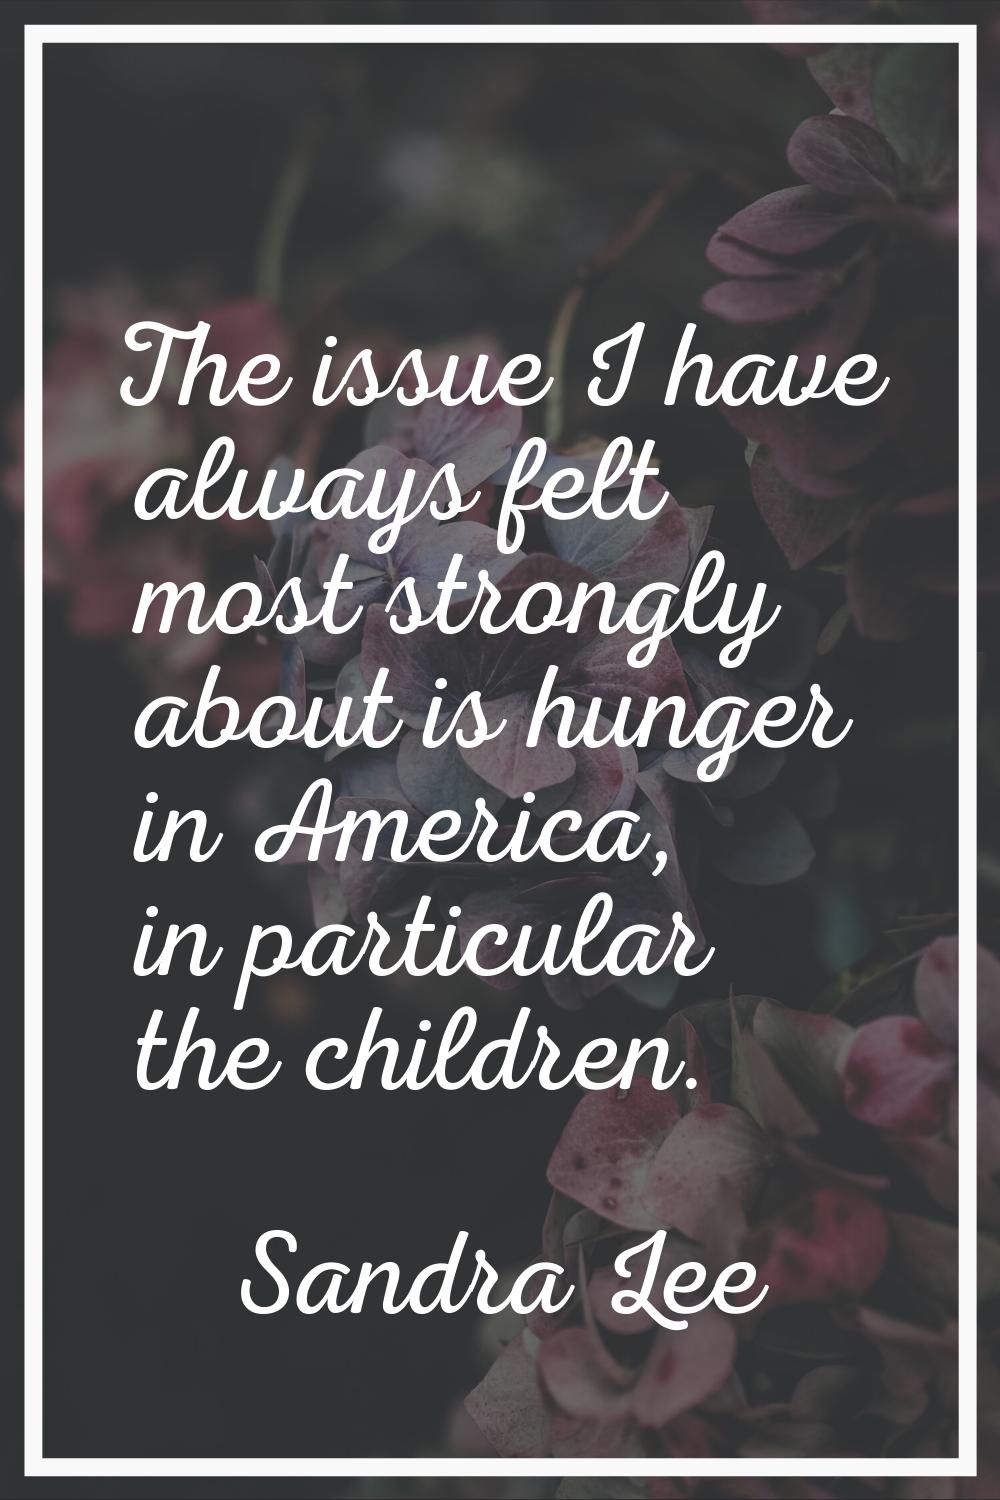 The issue I have always felt most strongly about is hunger in America, in particular the children.